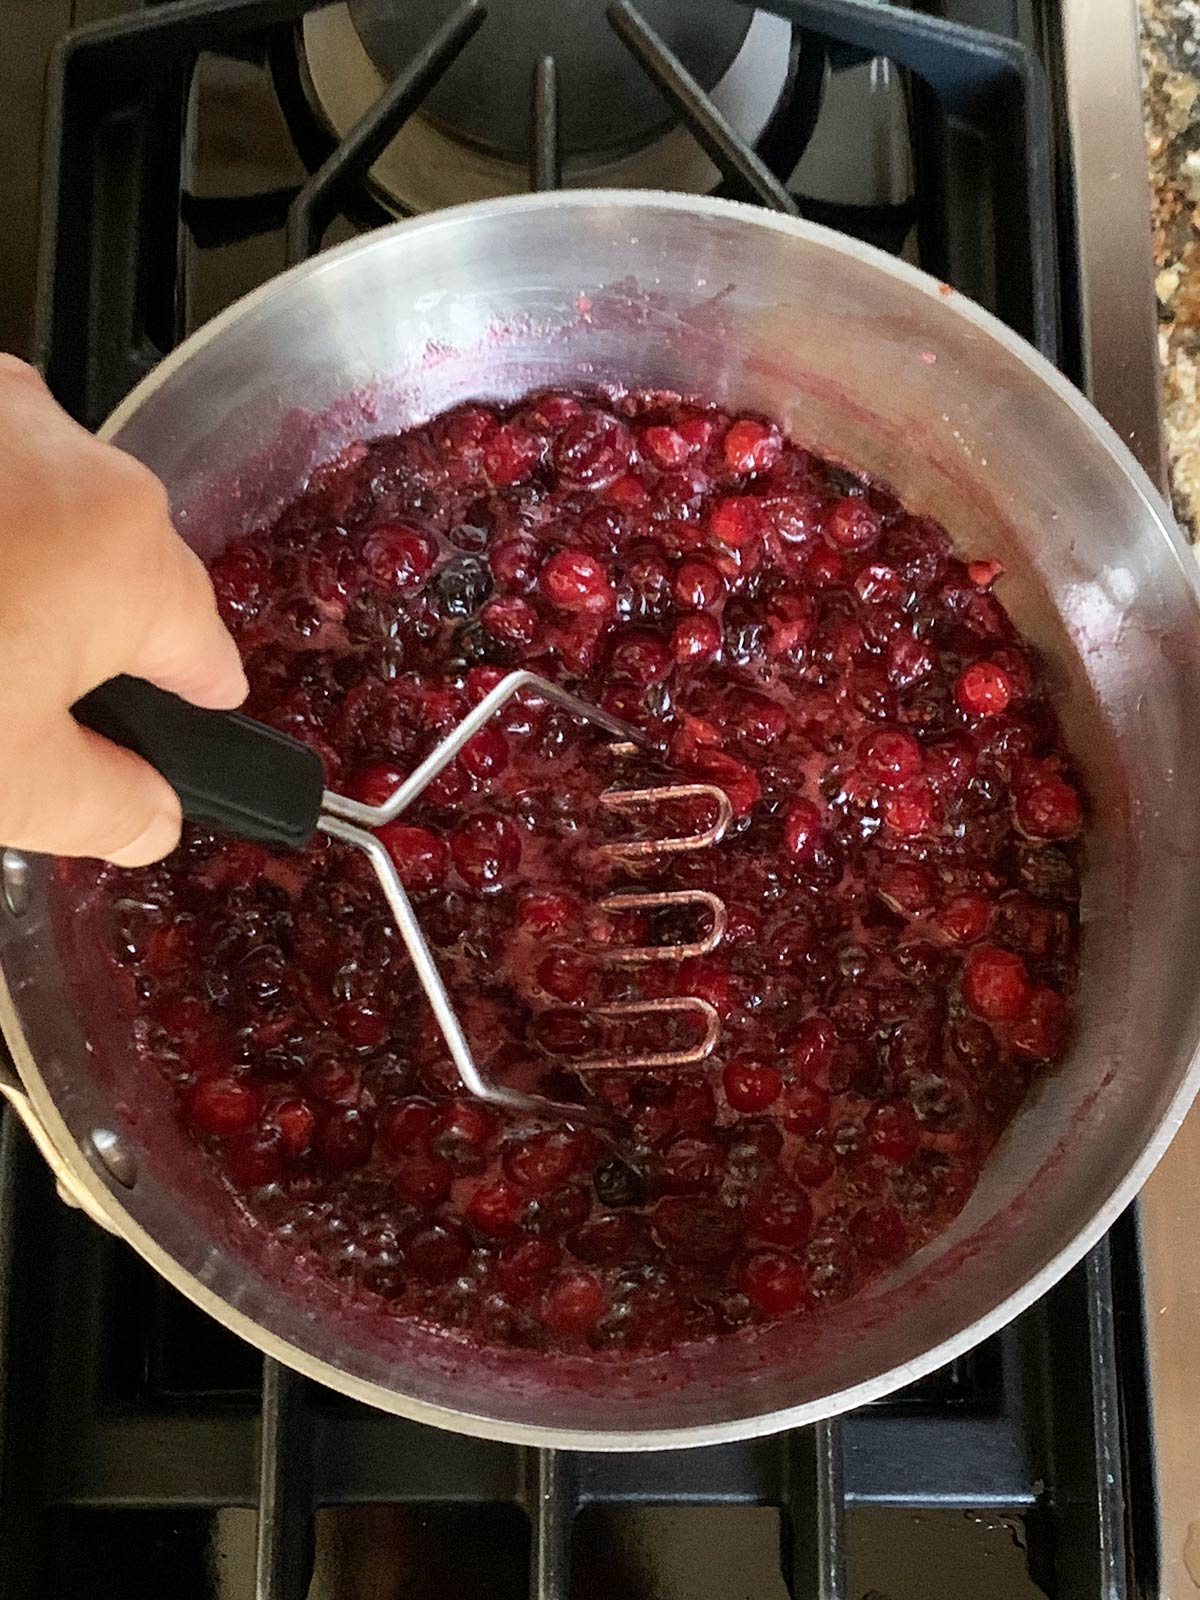 Hand holding potato masher mashing the cranberries in the pot.